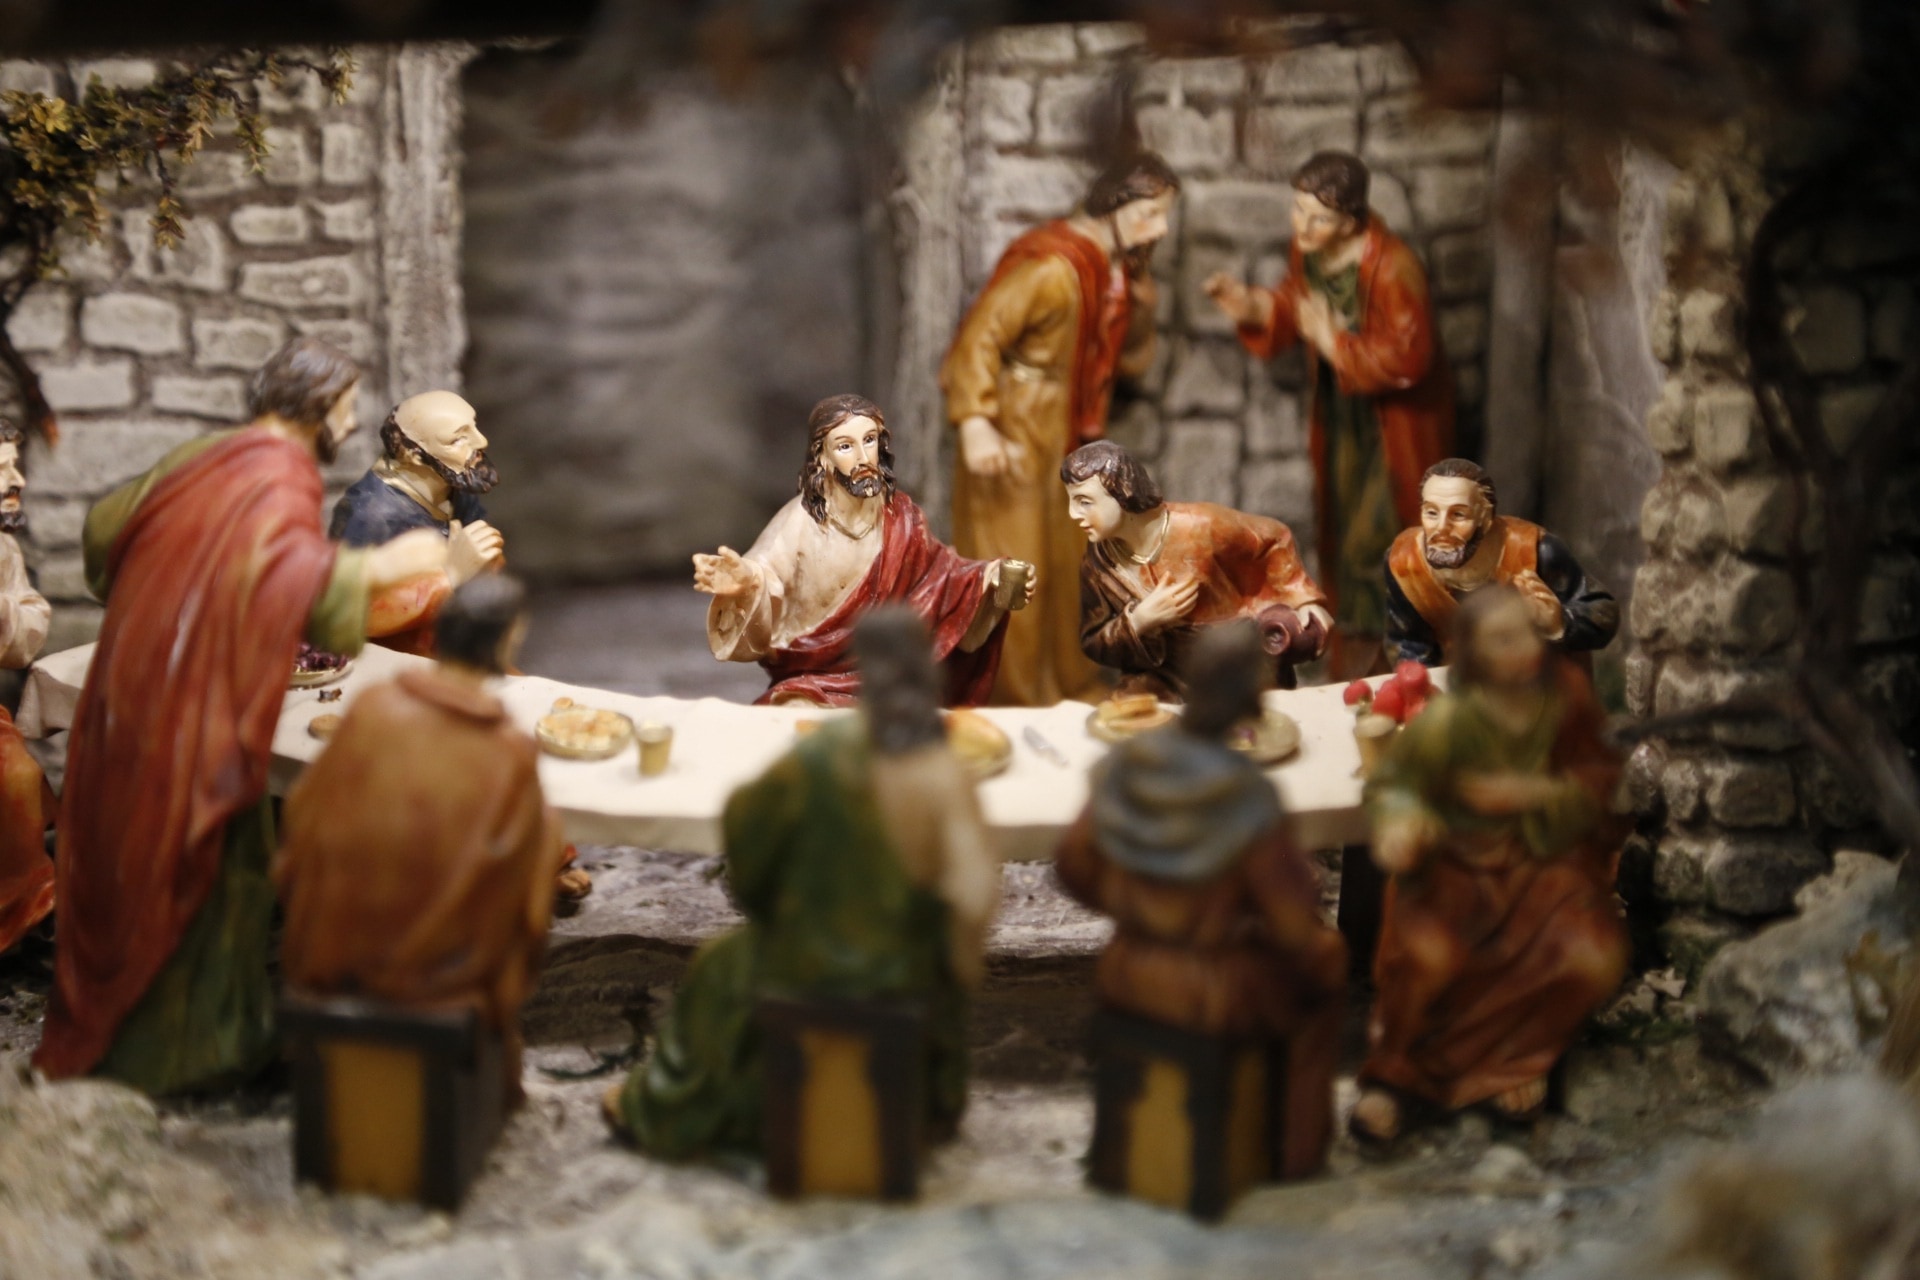 Closeup View Of The Last Supper Figurine - Examples Of Religious Diorama , HD Wallpaper & Backgrounds